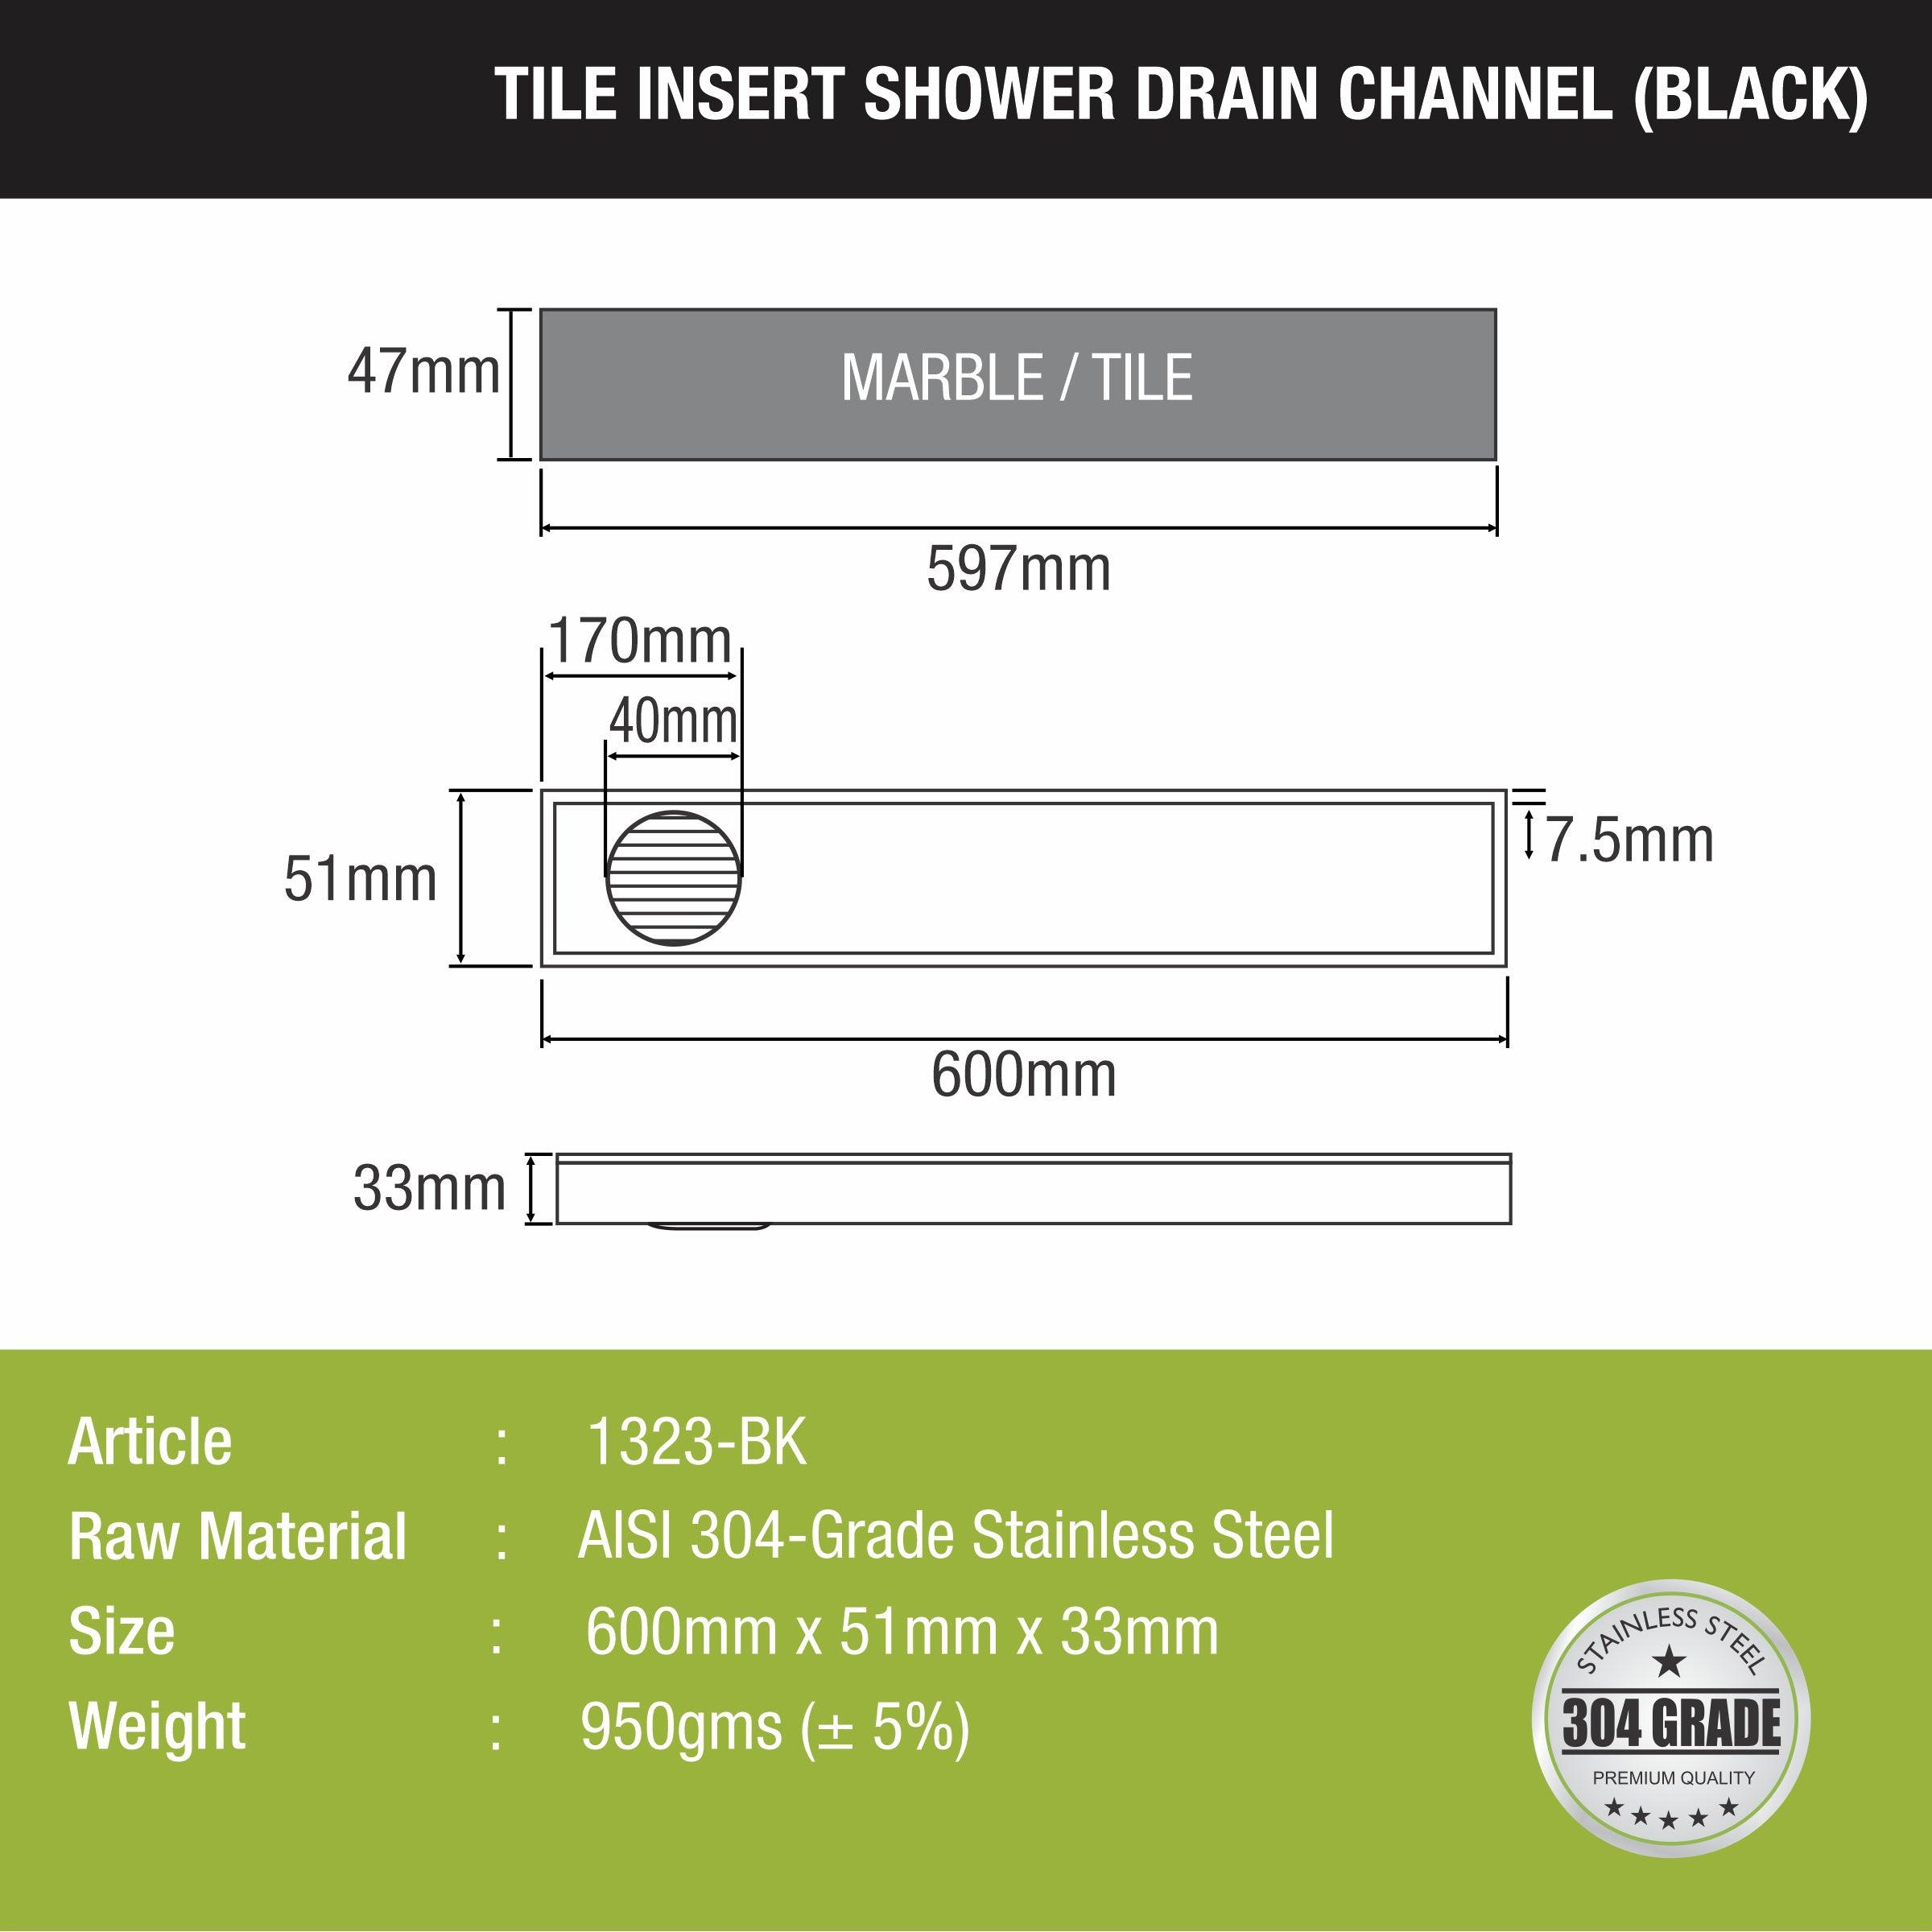 Tile Insert Shower Drain Channel - Black (24 x 2 Inches) size and measurement